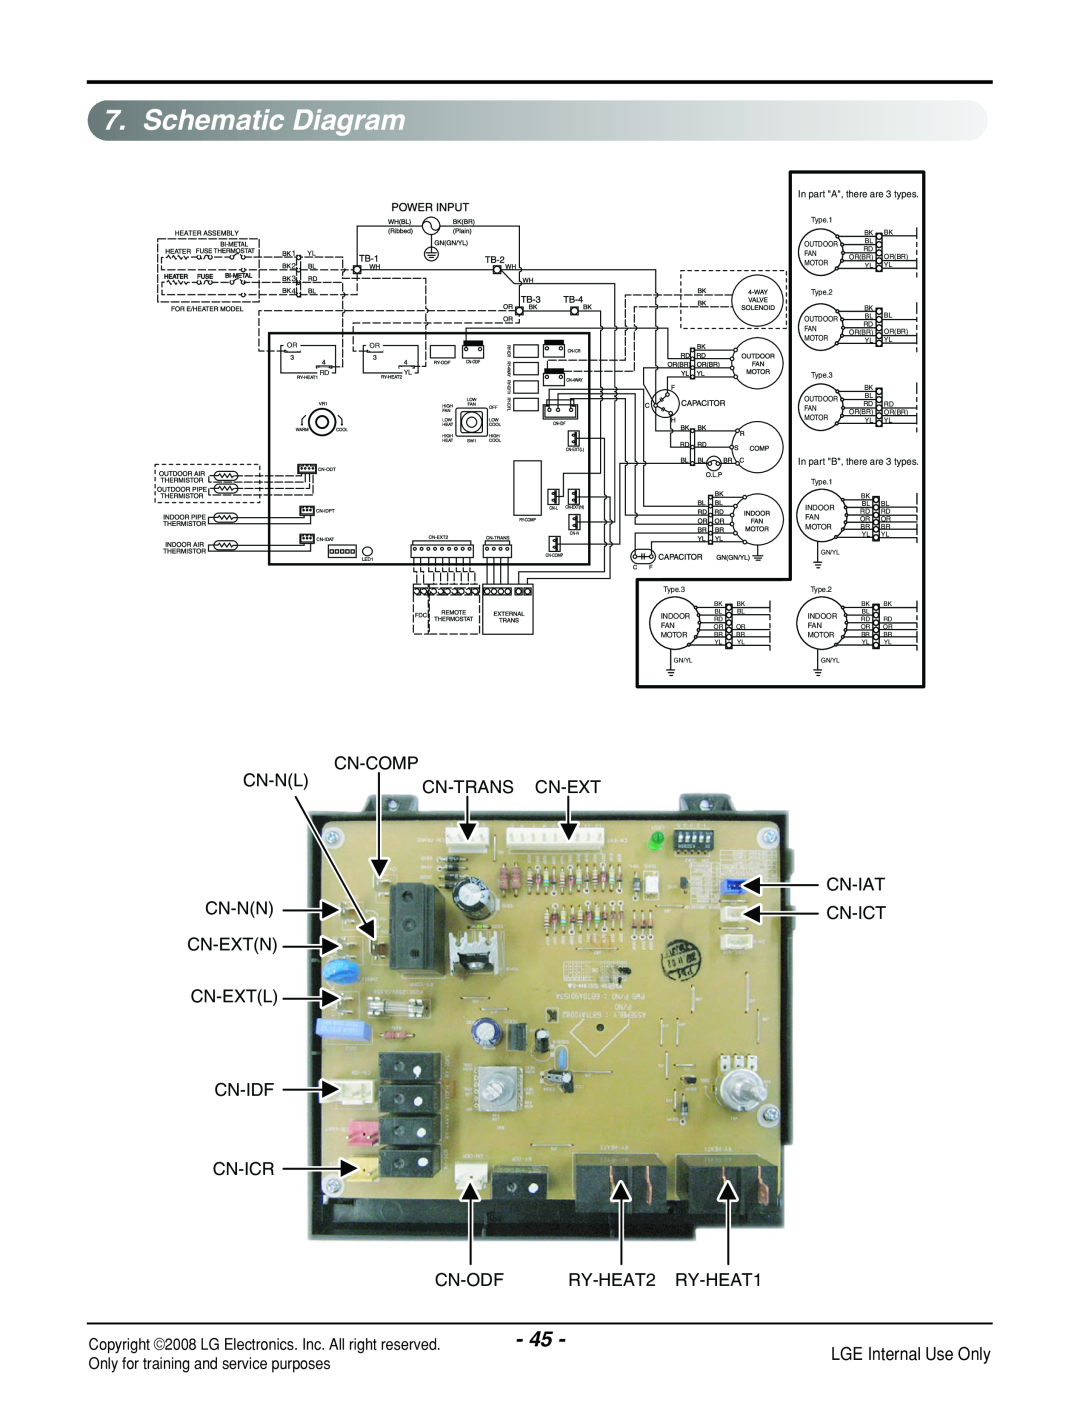 LG Electronics LP121CEM-Y8 manual Schematic Diagram, In part A, there are 3 types, In part B, there are 3 types 